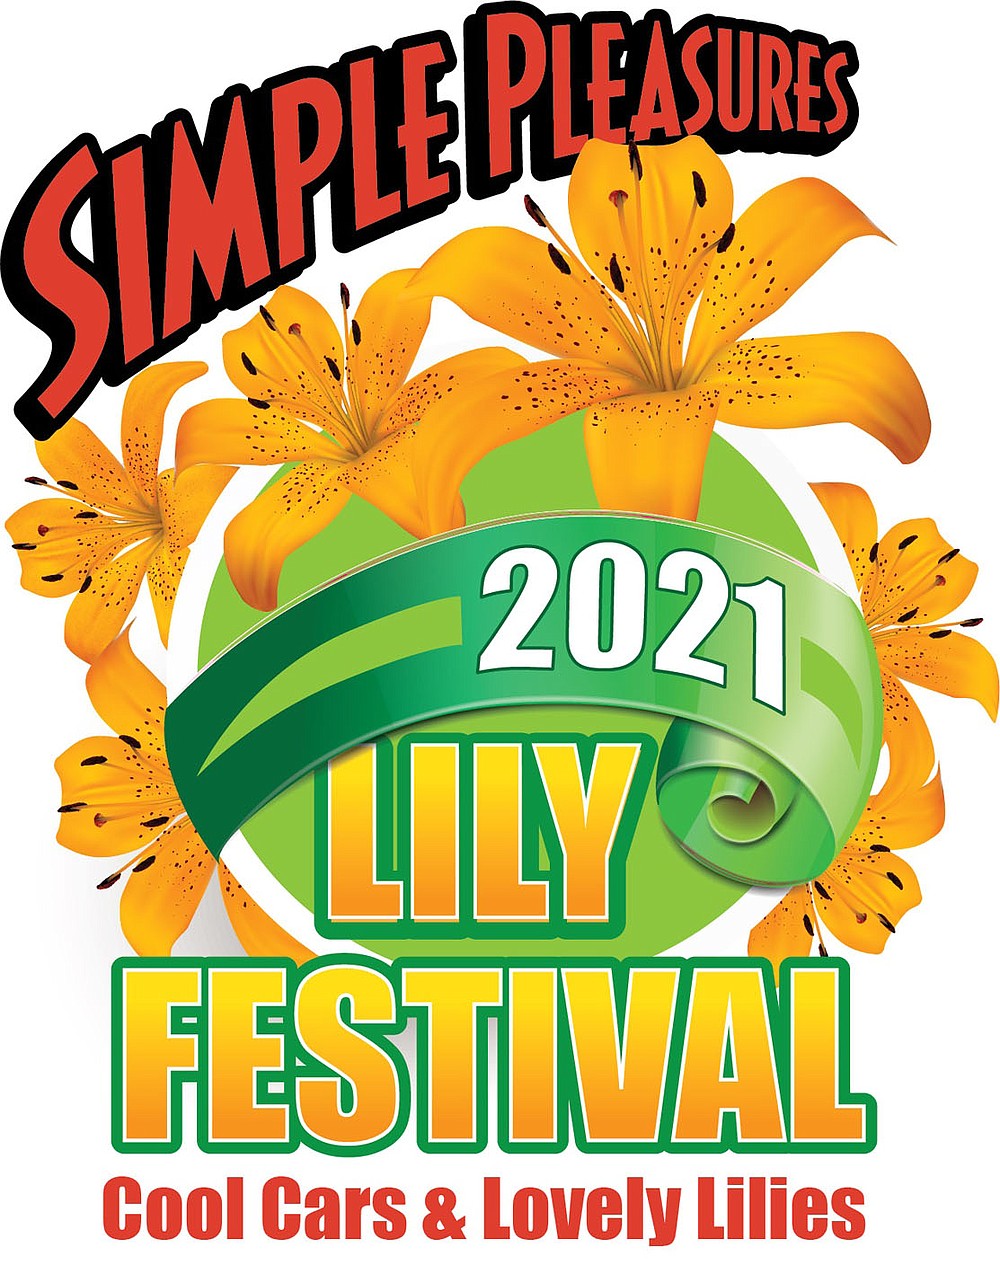 Lily Festival Invites Visitors To Step Back, Enjoy Simple Pleasures